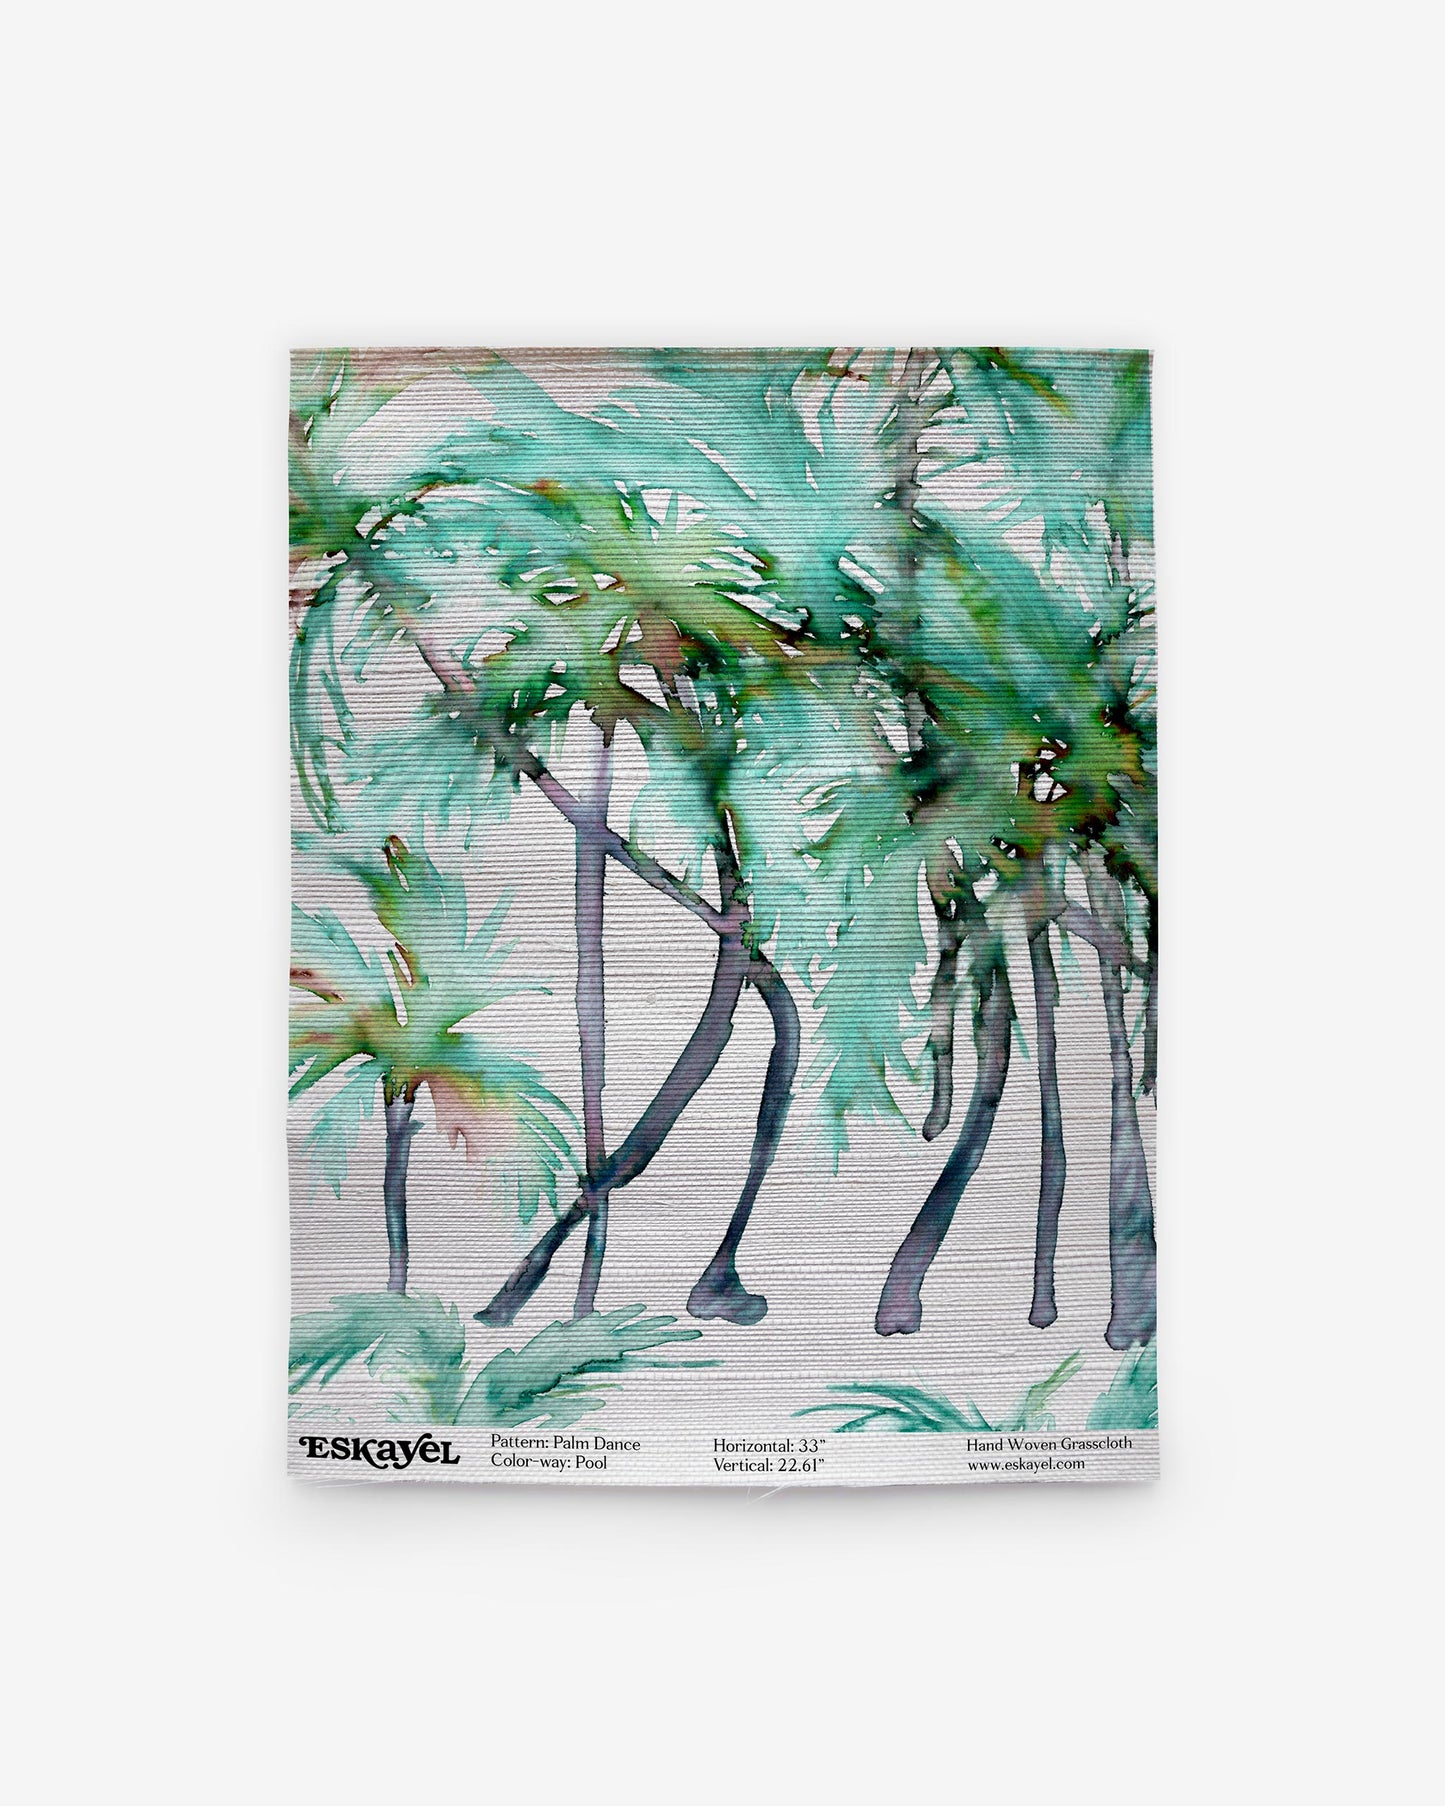 A watercolor painting of palm trees on wallpaper, featuring the Palm Dance Grasscloth Pool patternon wallpaper